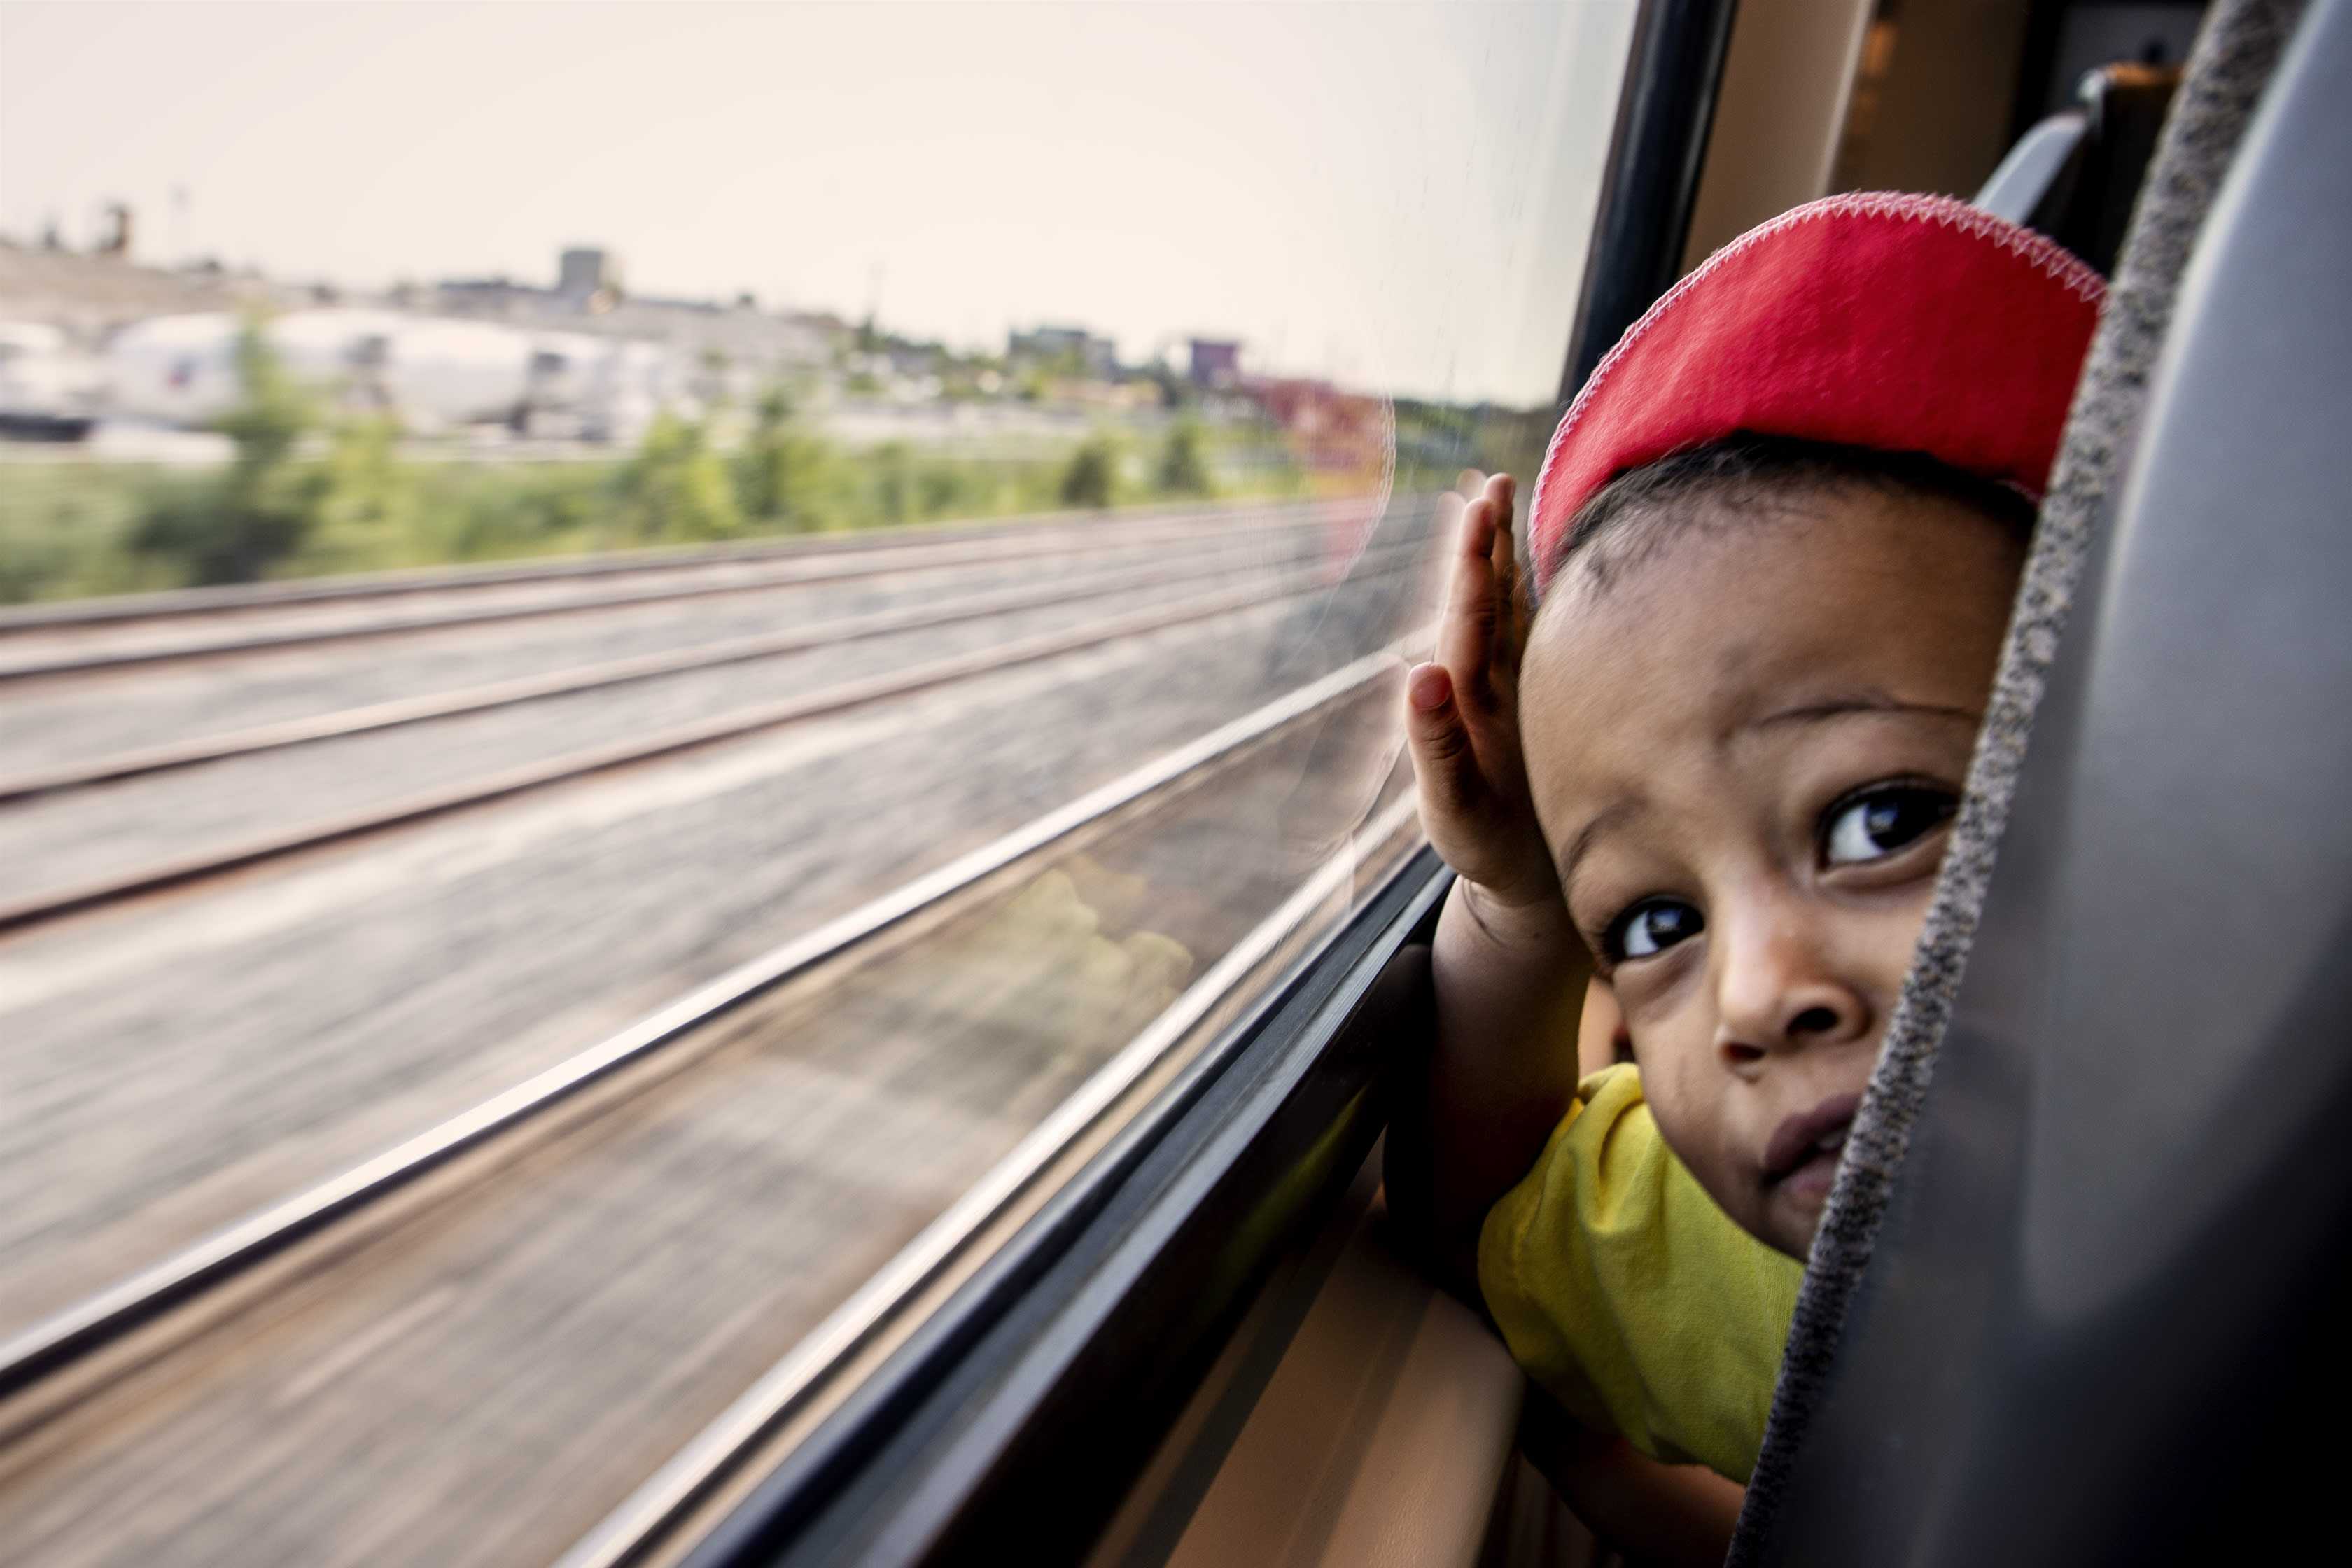 A child looks out the window of the UP train.